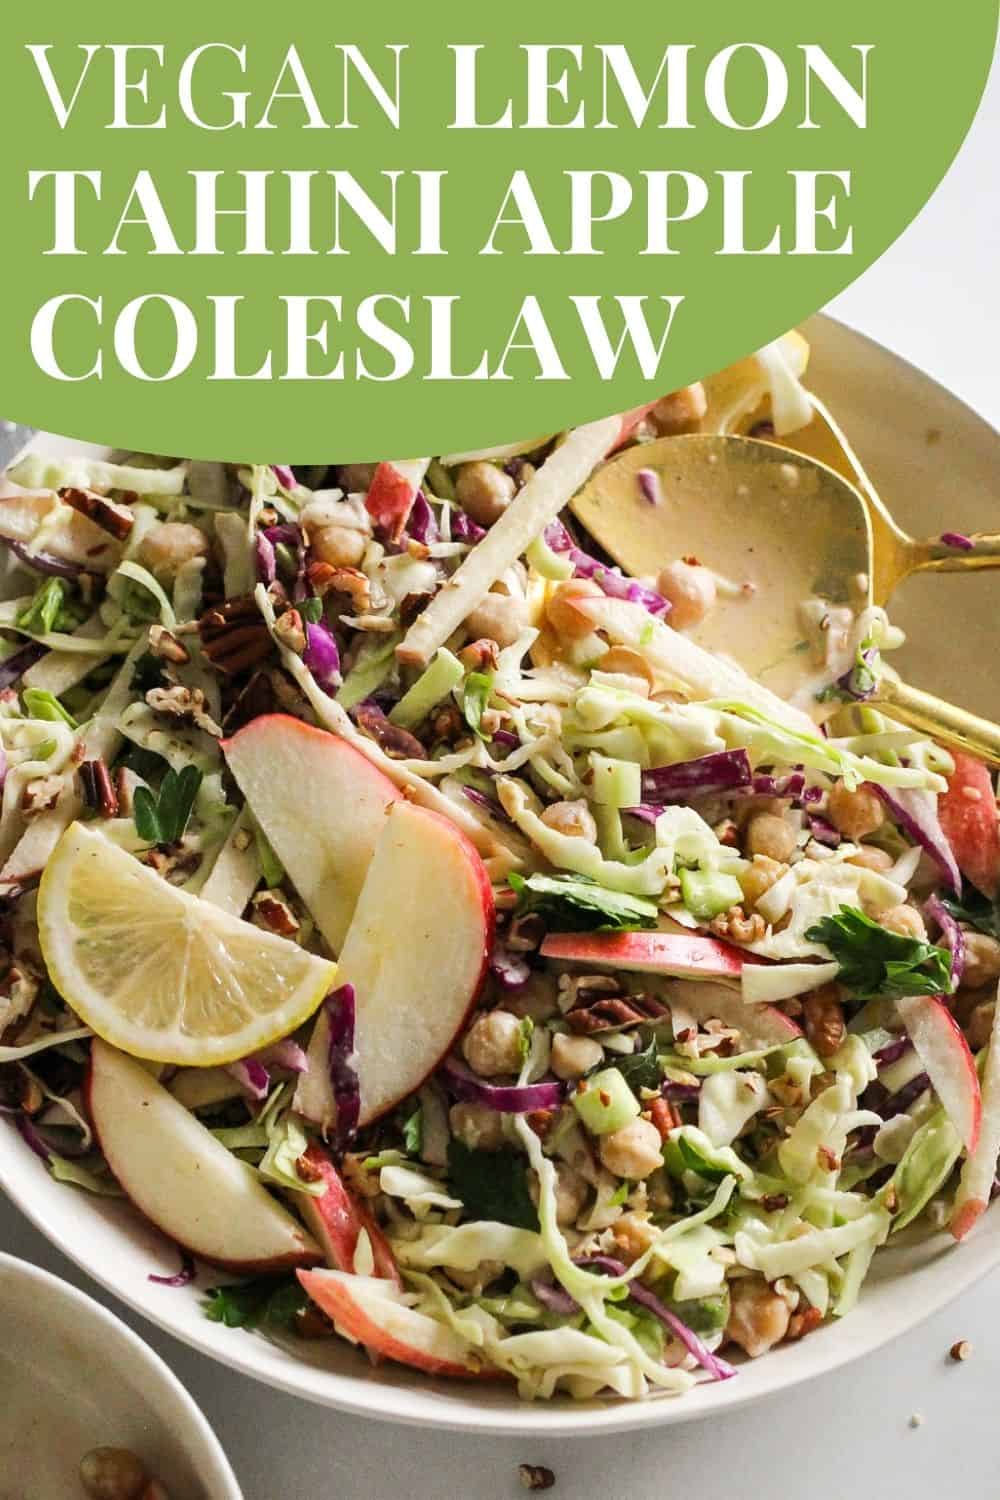 Cabbage slaw in white serving dish with green and white text that reads, "Vegan Lemon Tahini Apple Coleslaw."